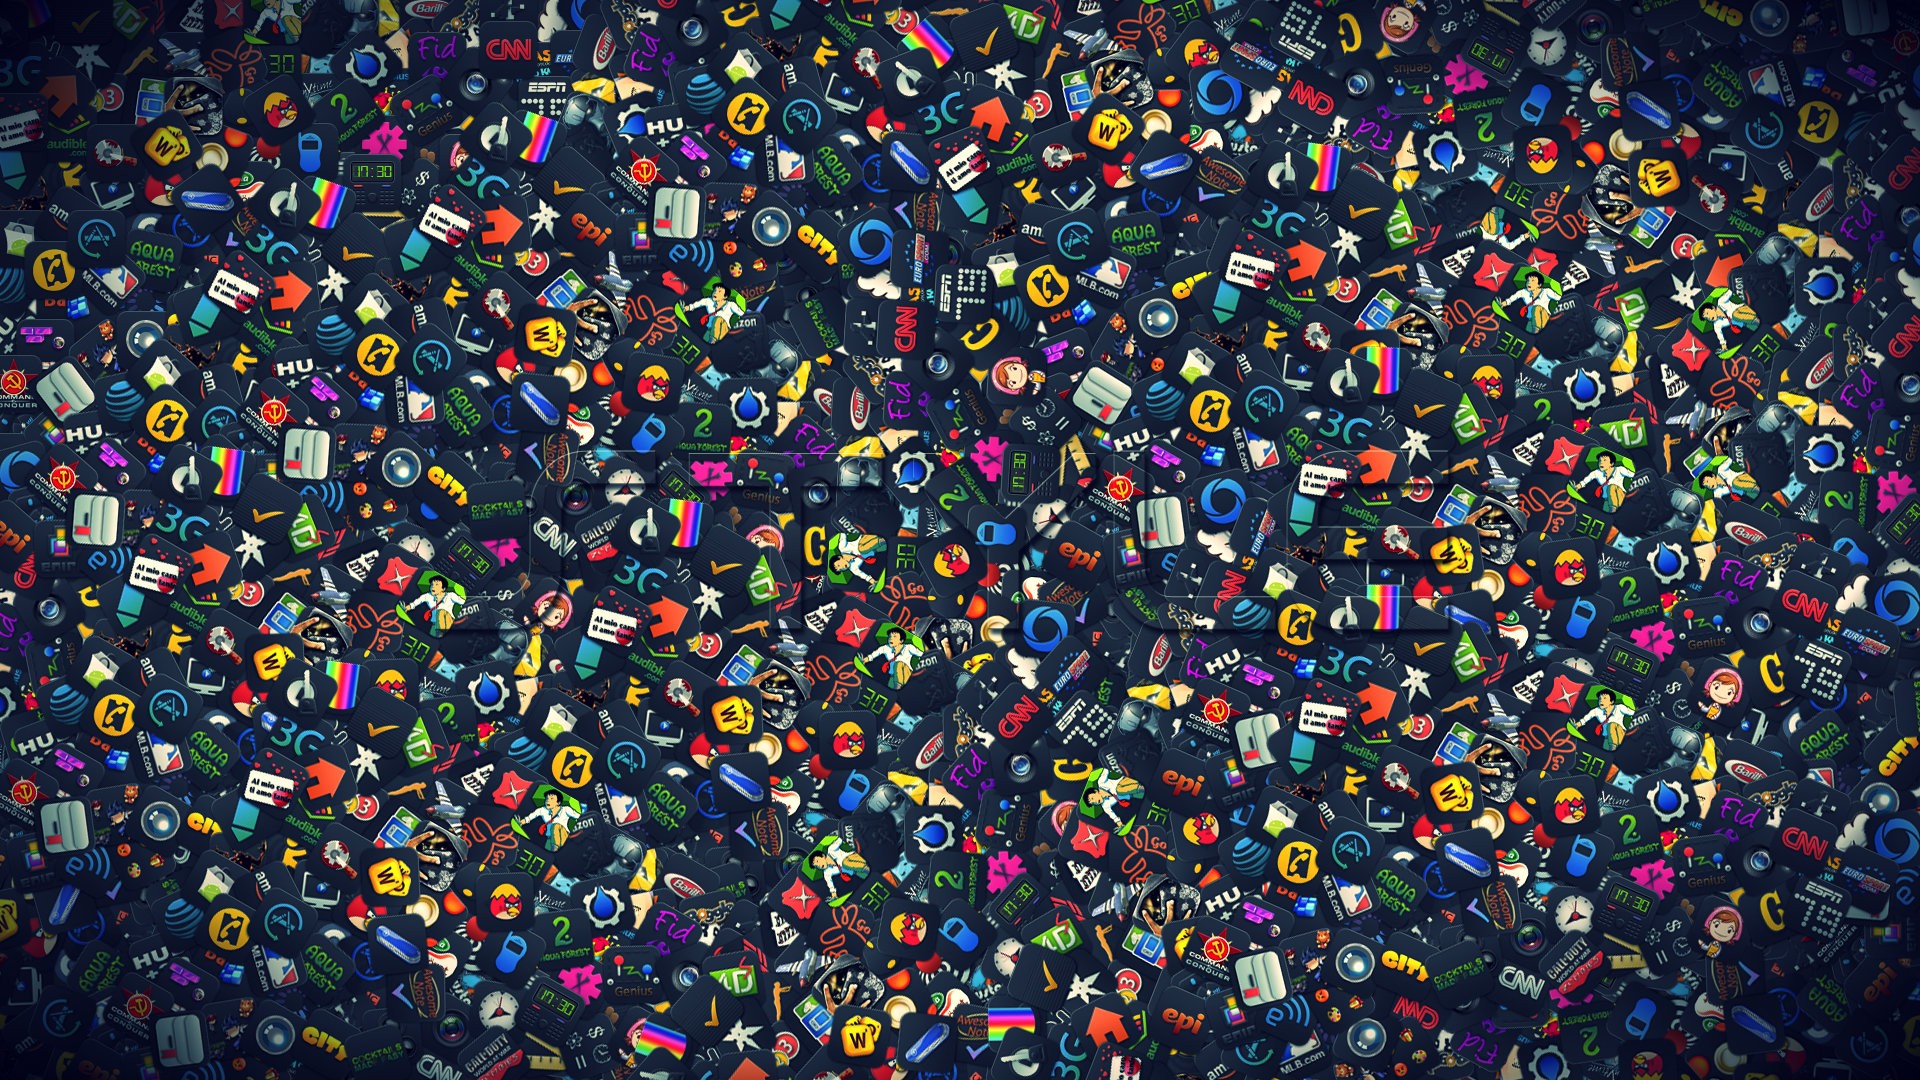 art wallpaper,crowd,pattern,party supply,confetti,space